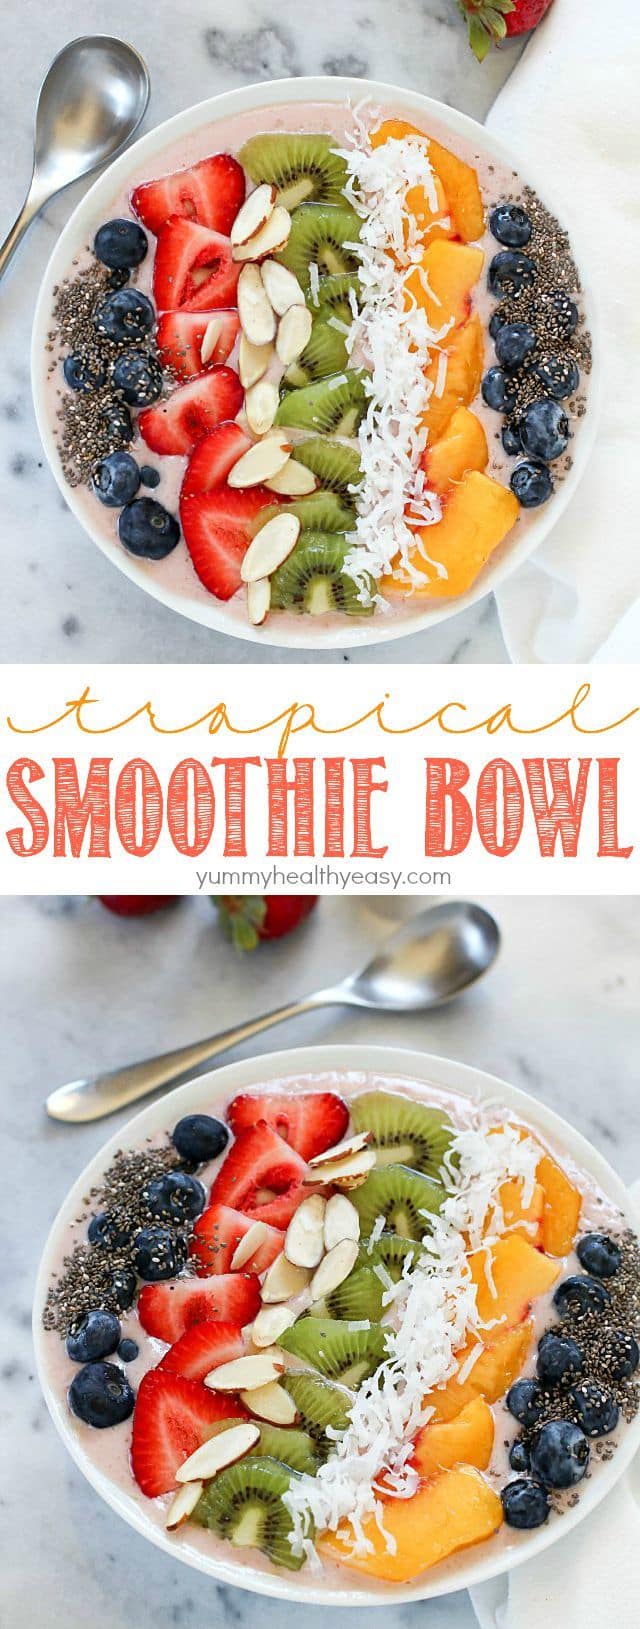 This Tropical Smoothie Bowl Recipe is the perfect breakfast or snack! It's dairy-free, gluten-free, full of protein and fresh fruit and totally delicious. Satisfying and easy to make, too! #SilkCashew #ad